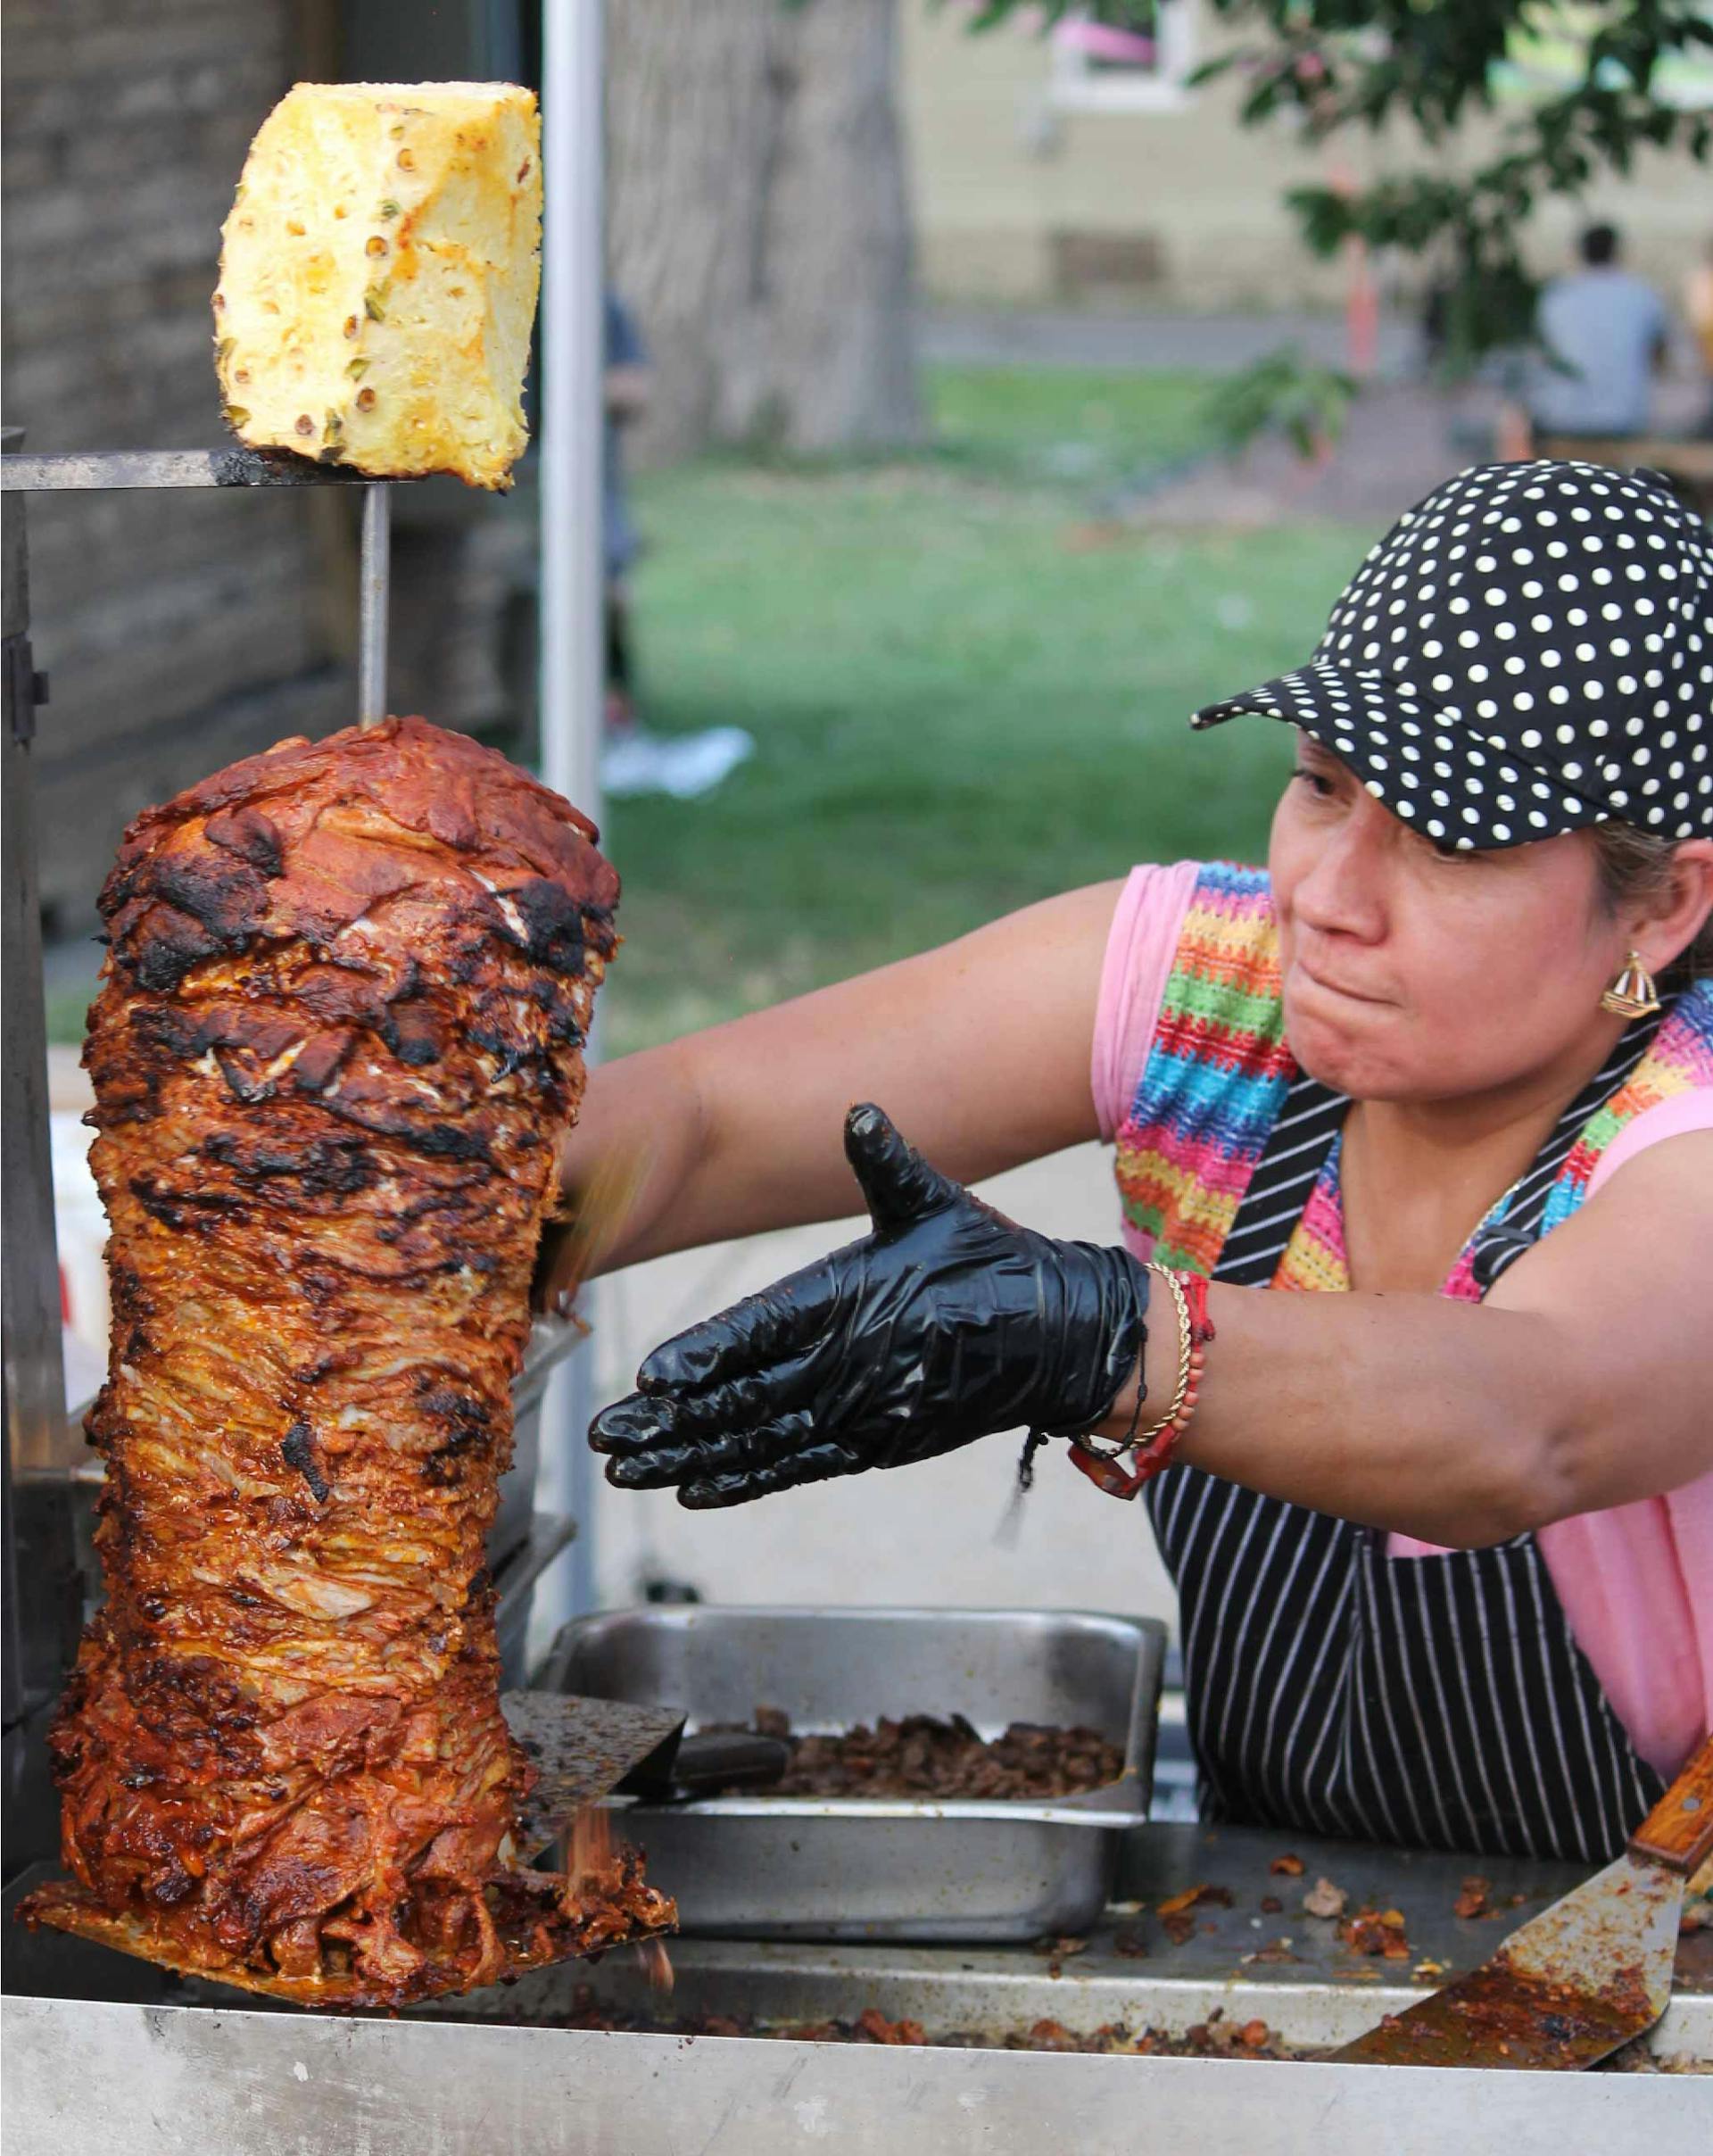 conchis spinning the trompo and cutting some of the pork off while spinning it